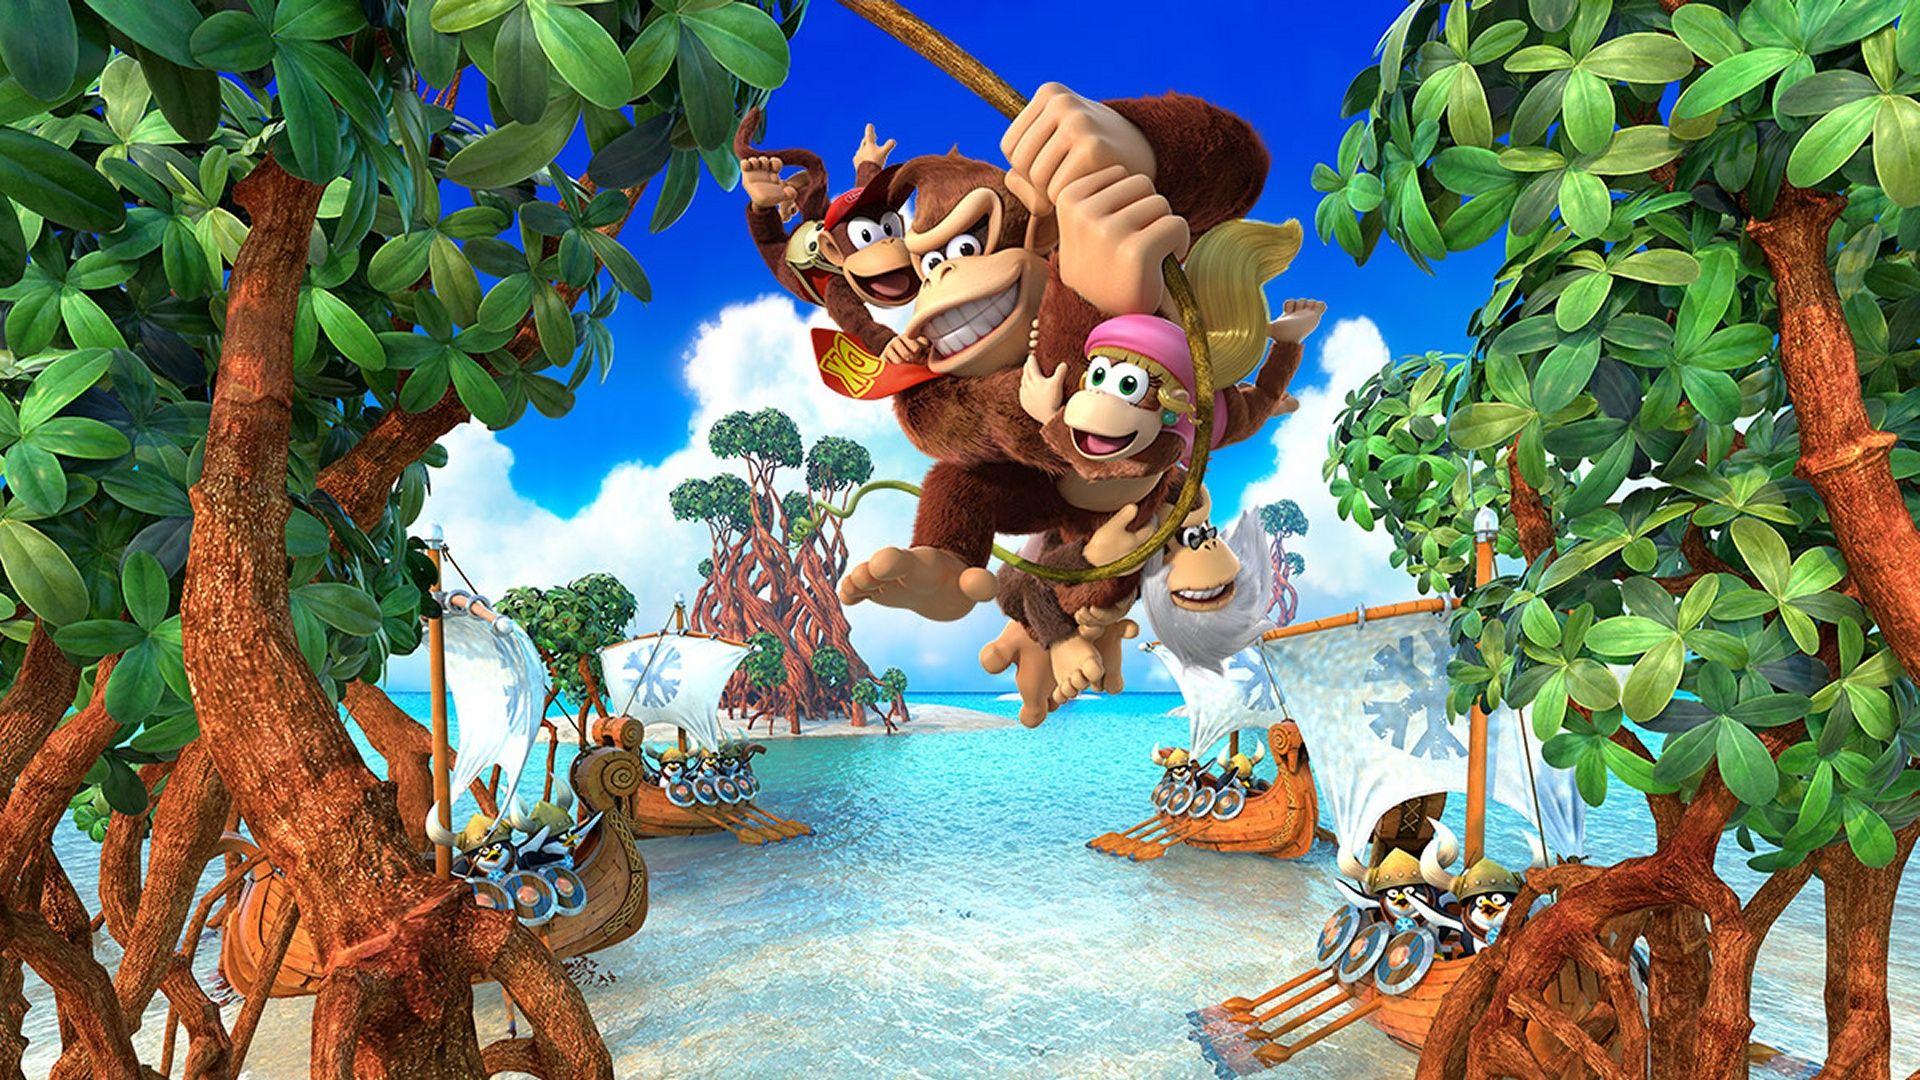 Donkey Kong Country: Tropical Freeze (Switch) Review